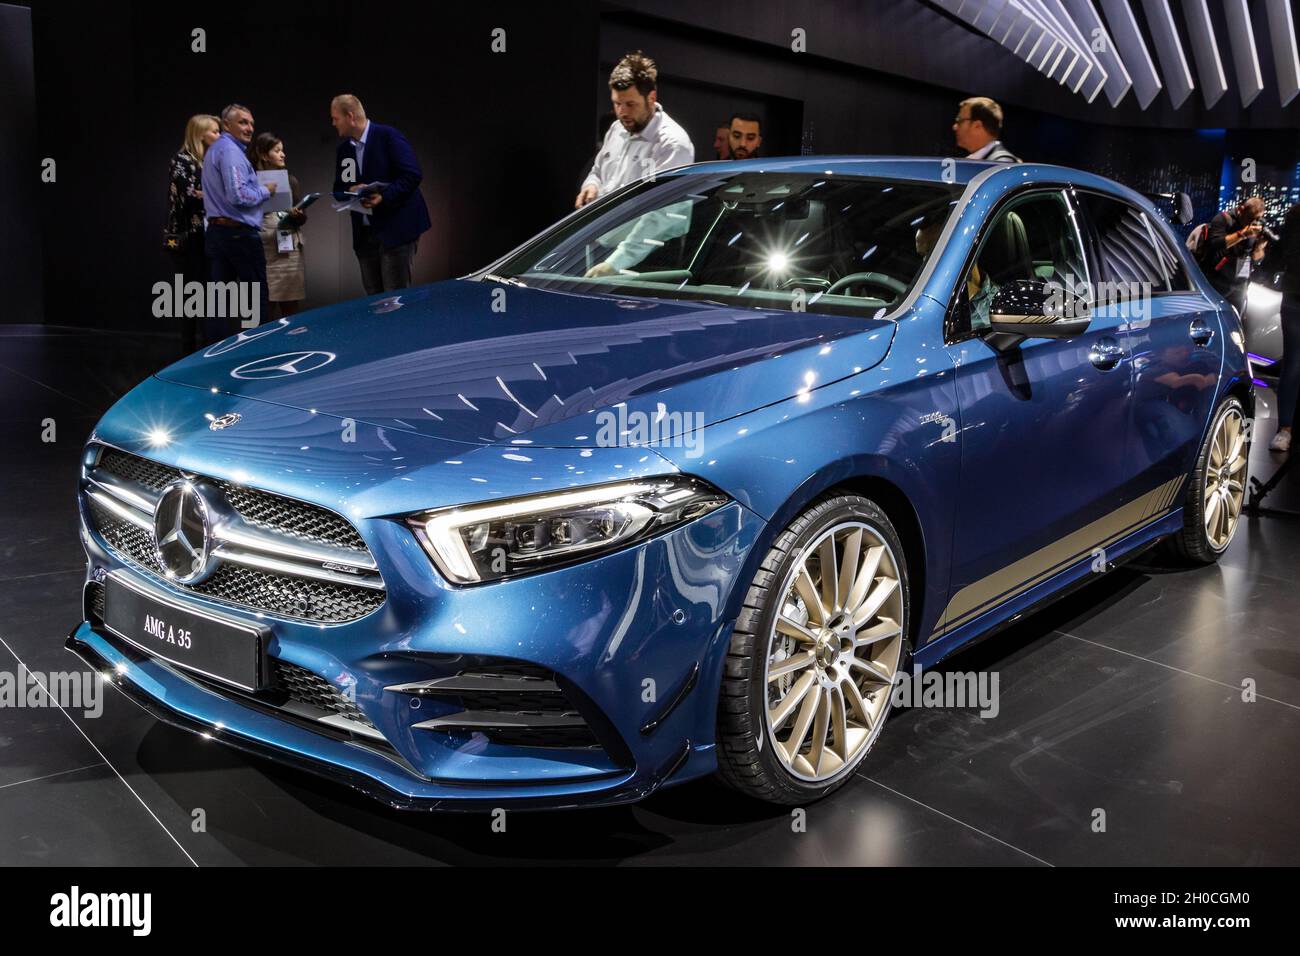 Mercedes-AMG A-Class A 35 4MATIC car showcased at the Paris Motor Show. Paris, France - October 2, 2018. Stock Photo